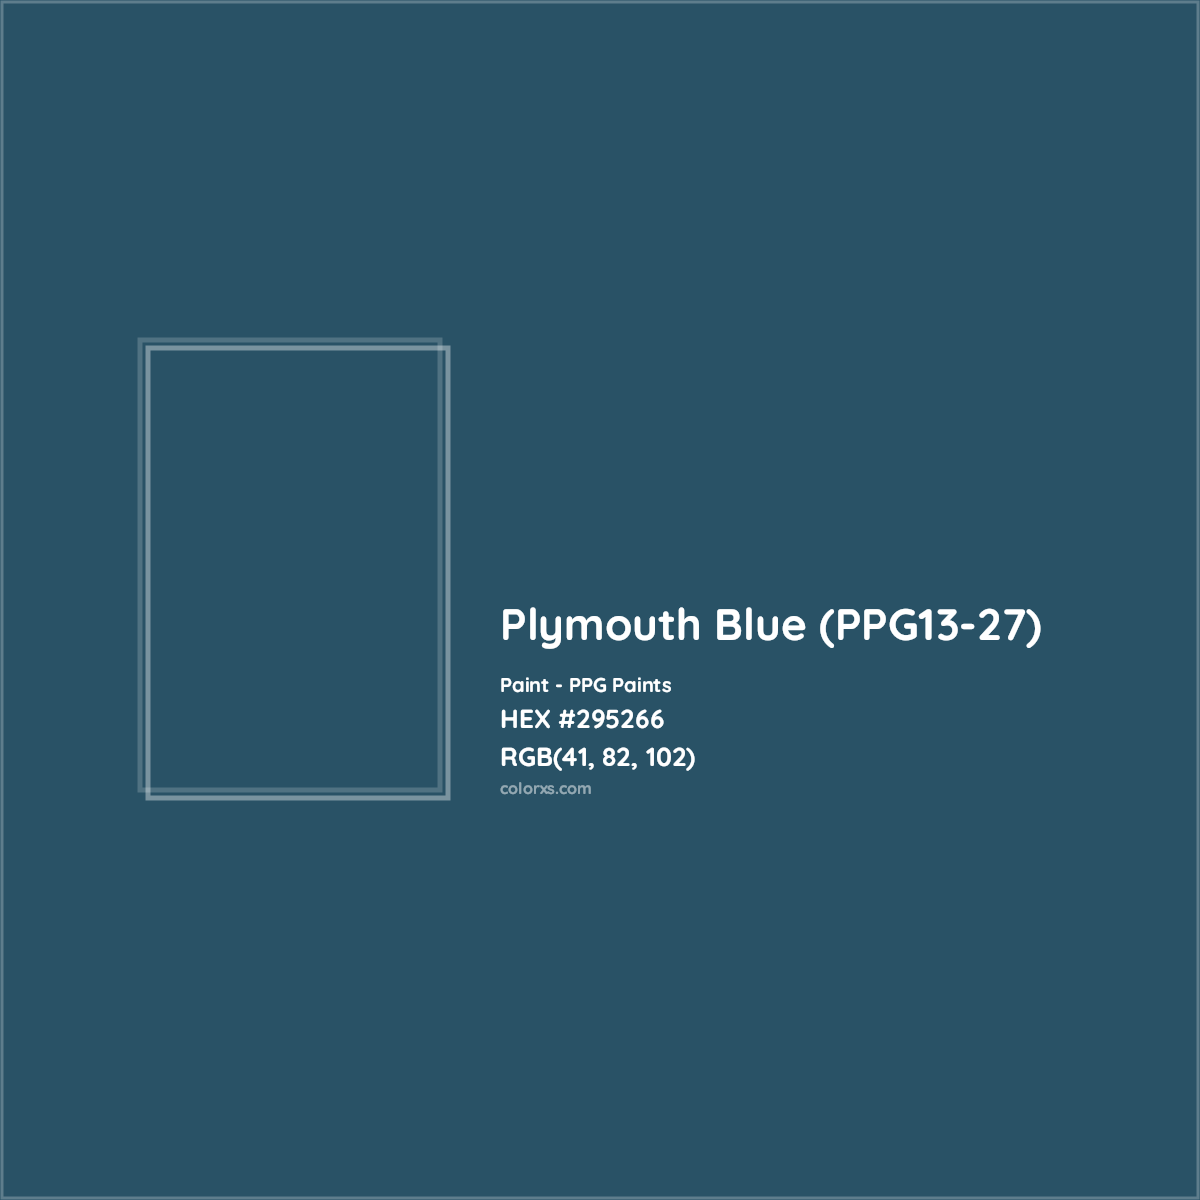 HEX #295266 Plymouth Blue (PPG13-27) Paint PPG Paints - Color Code